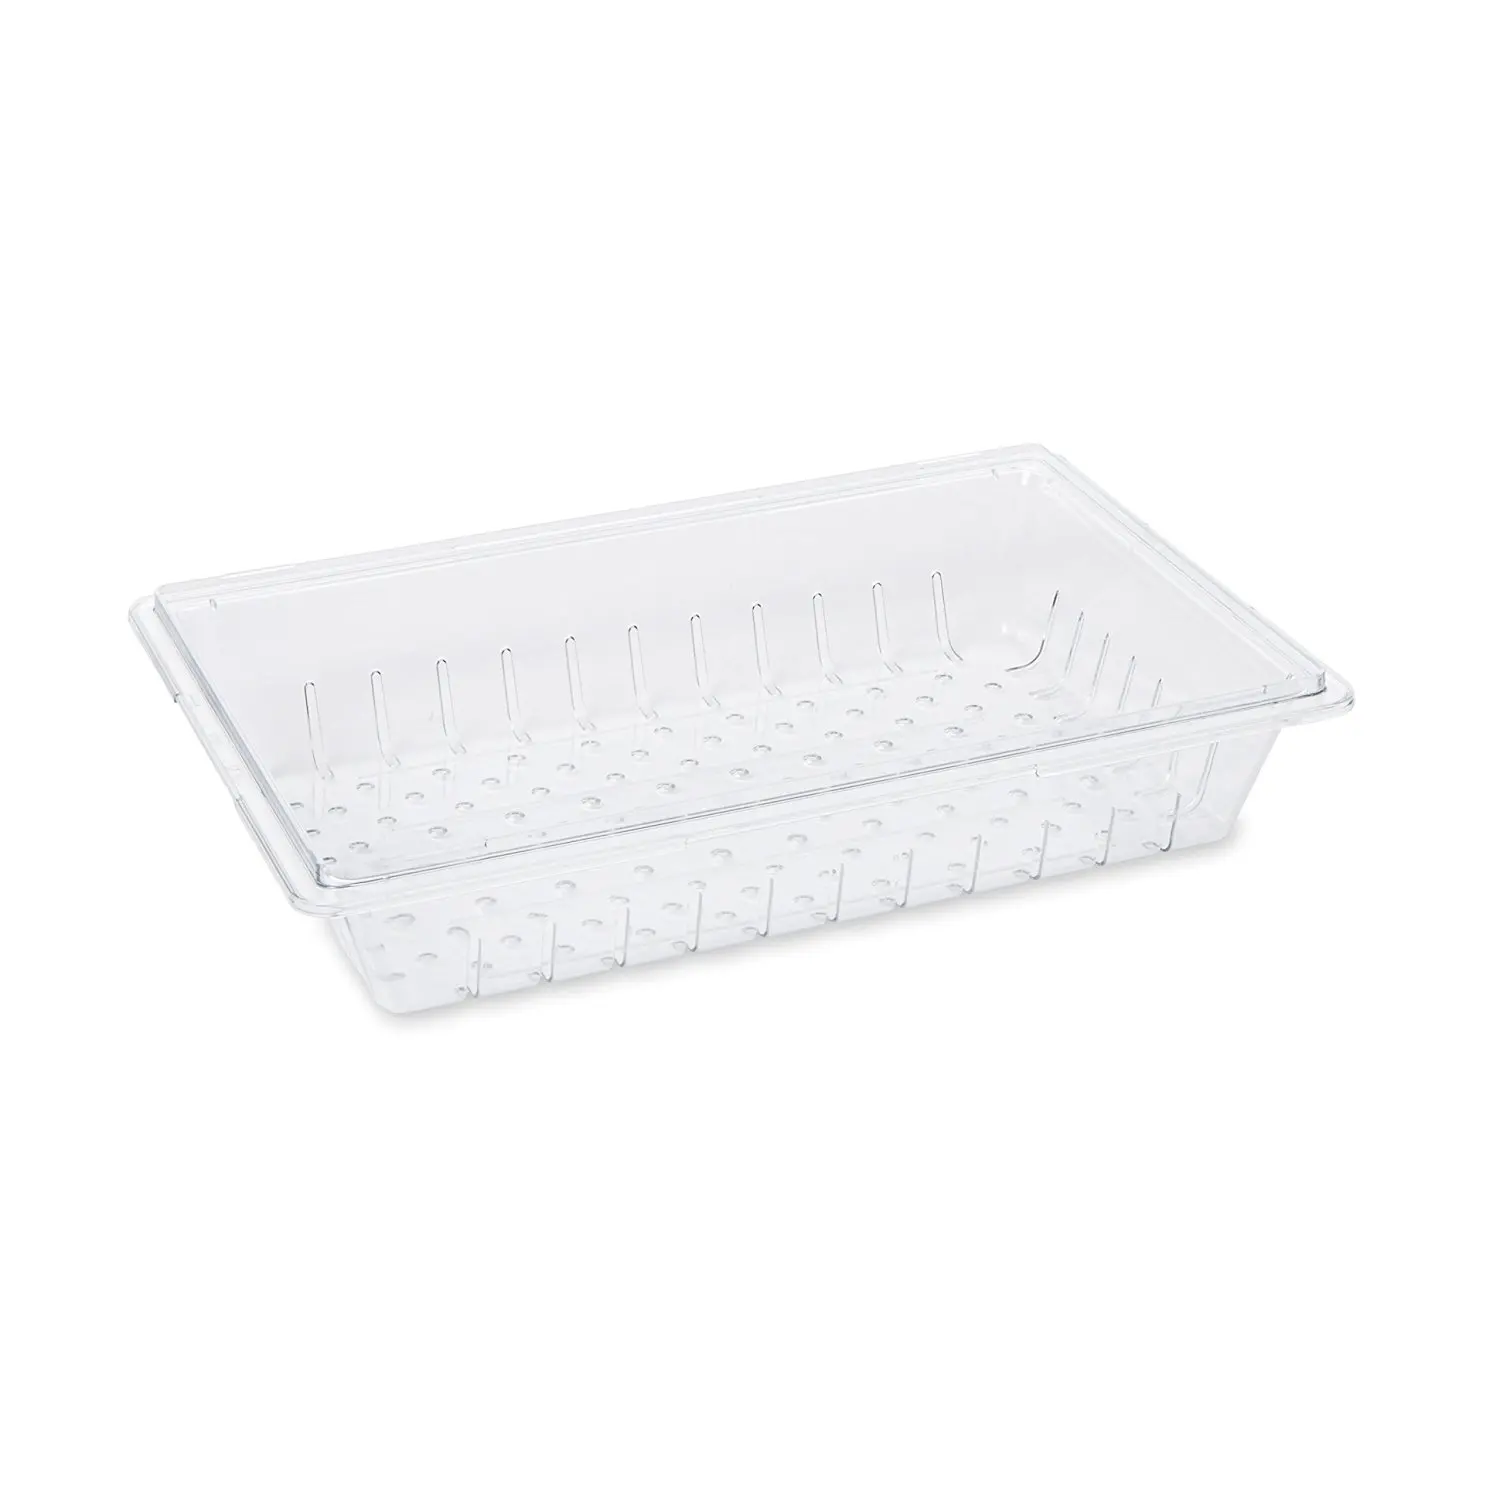 rubbermaid collapsible colander